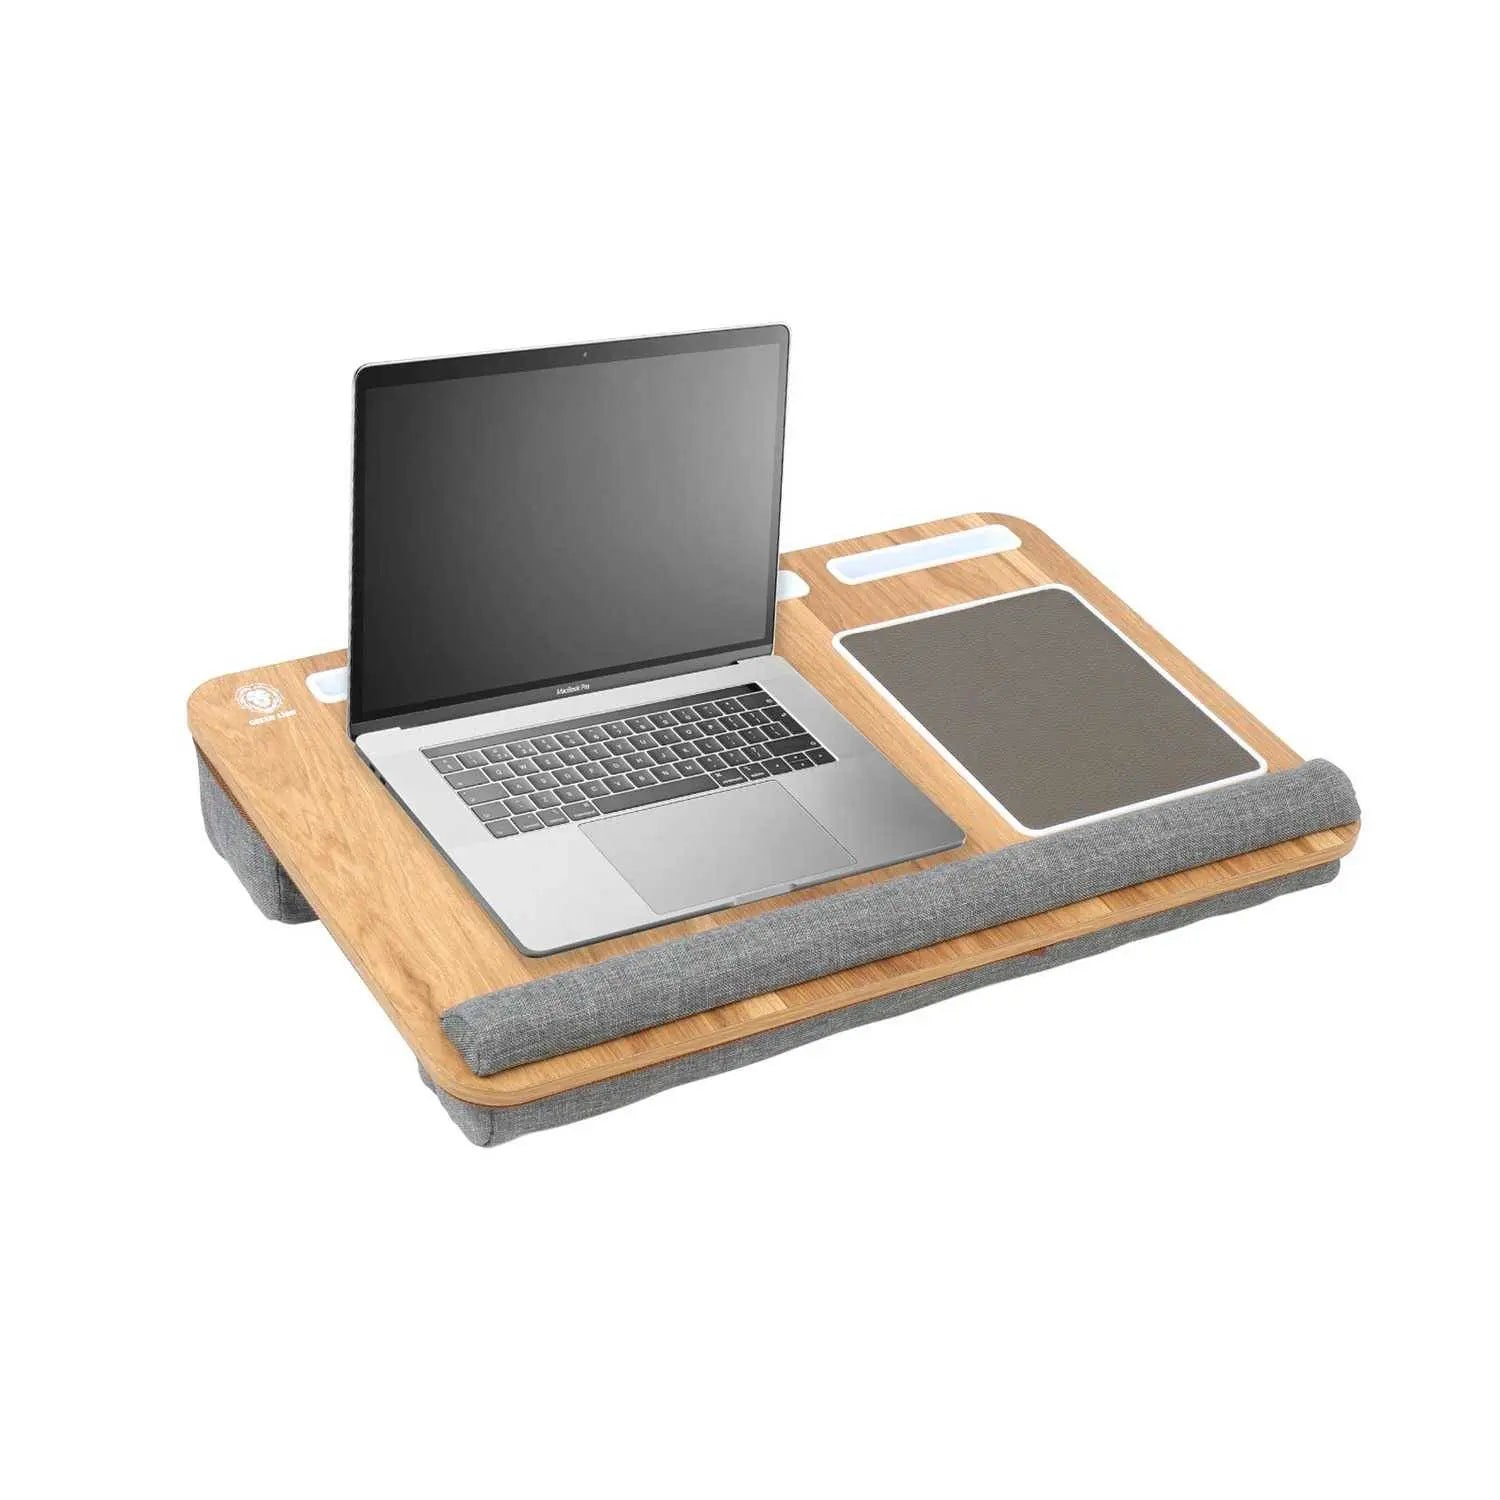 Green Lion Portable Lap Desk With Carry Strap (Dual Cushion) - Grey